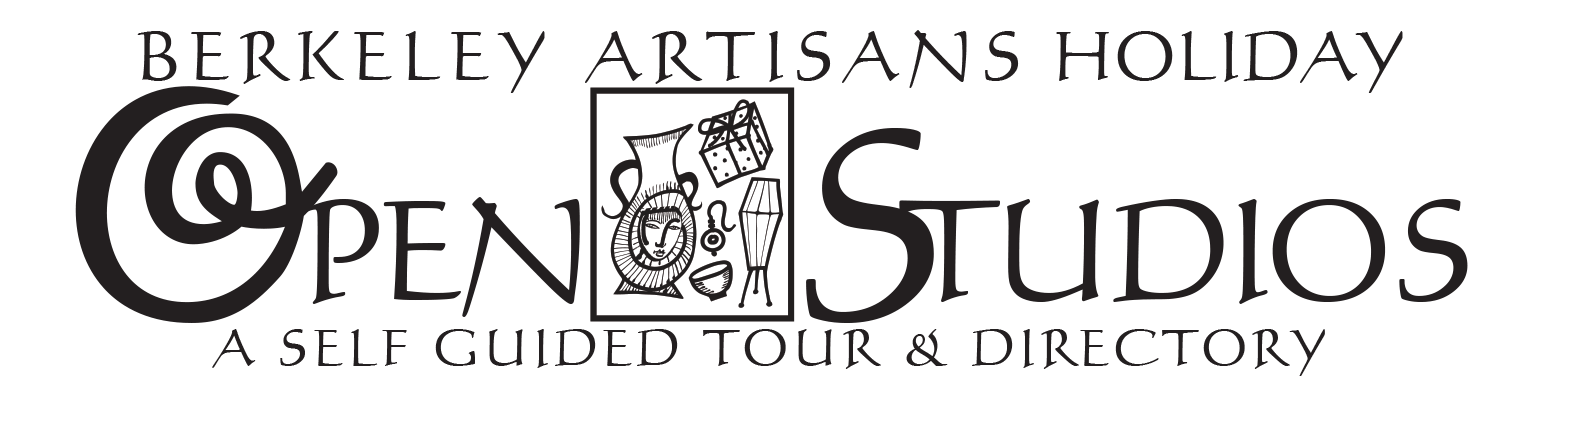 BERKELEY ARTISANS HOLIDAY OPEN STUDIOS<br><small>A Free Self-Guided Tour of Workshops & Galleries</small>